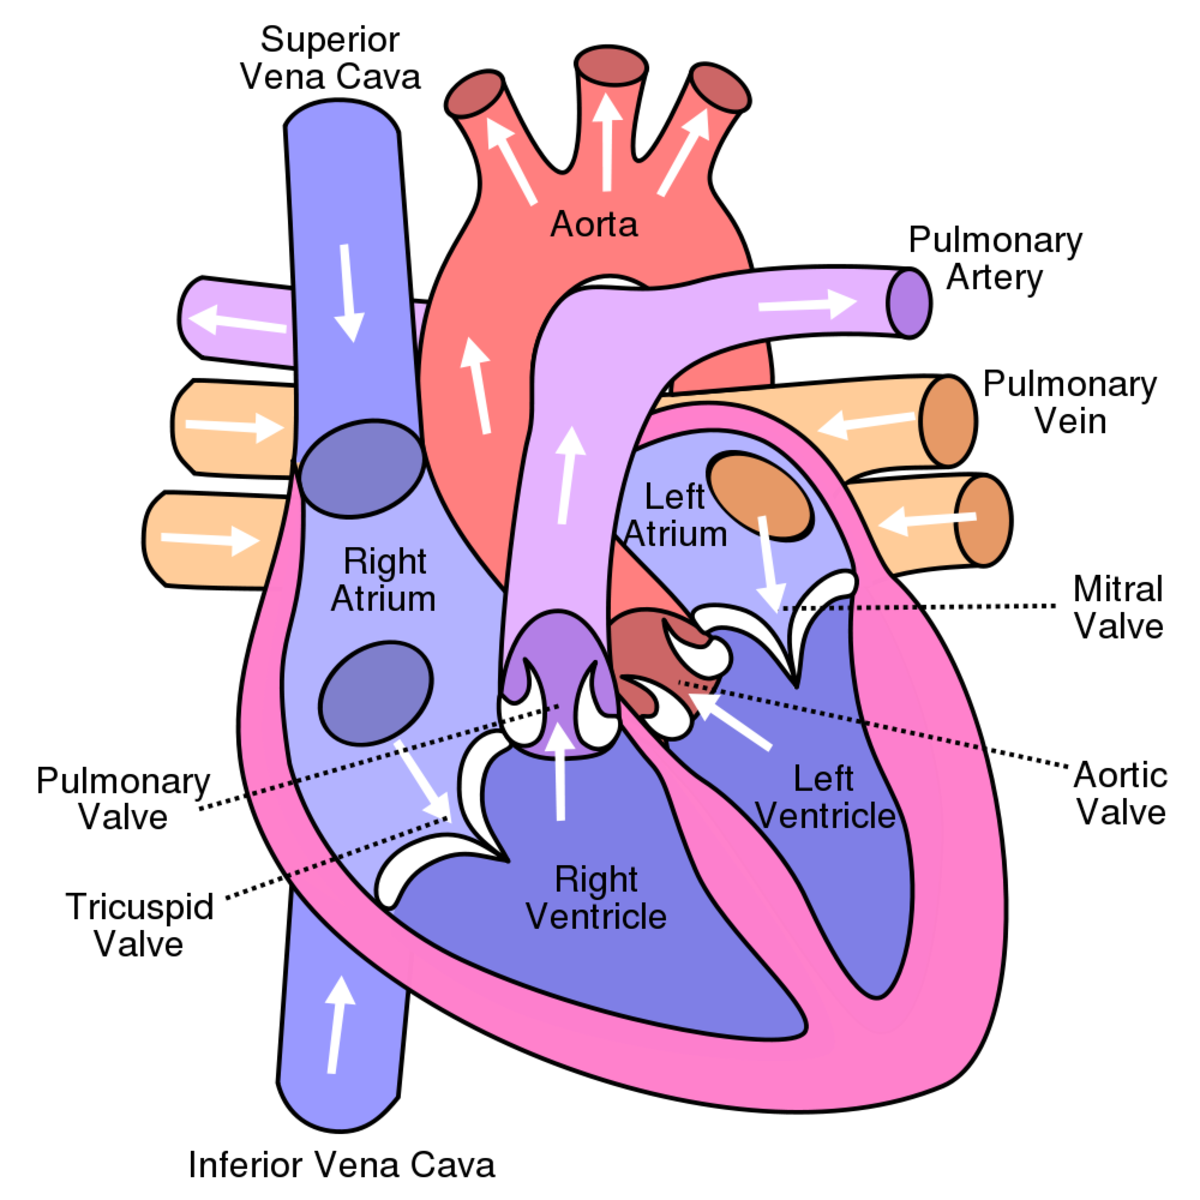 The structure of the heart